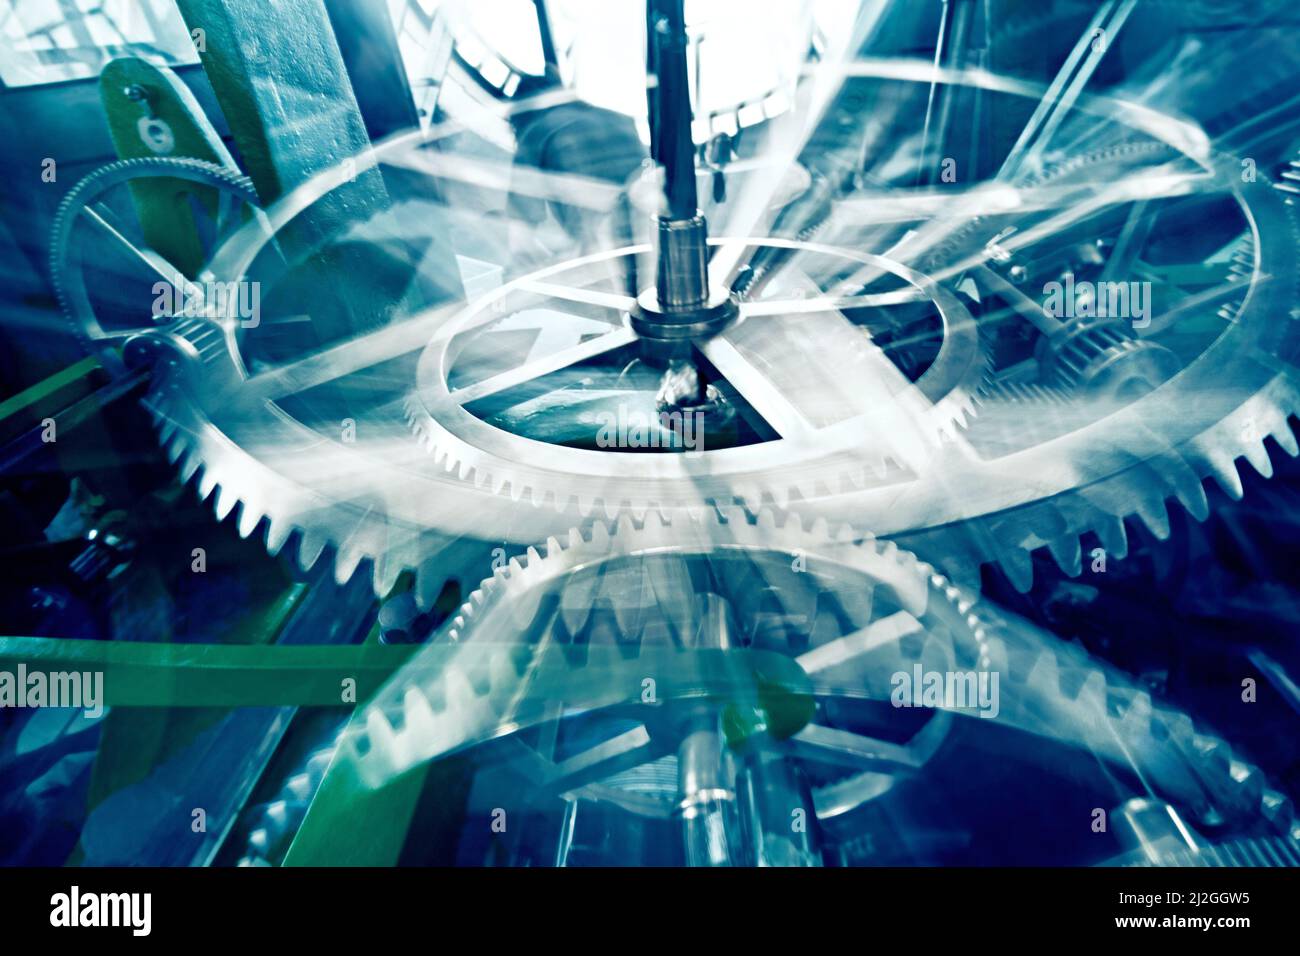 Concept of time. Digitally enhanced image of clock work in blue tones. Stock Photo